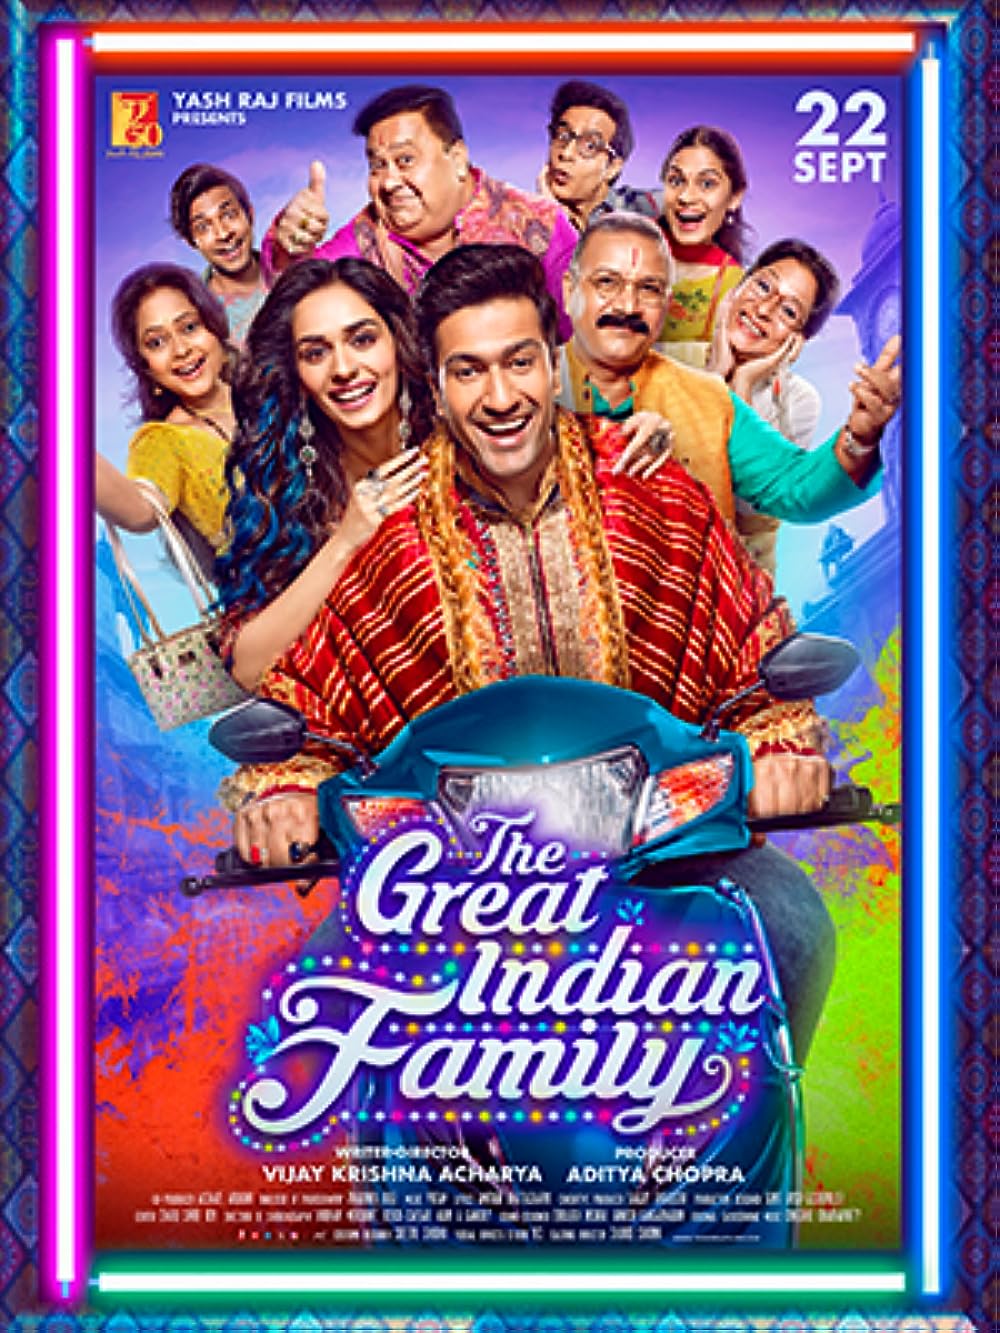 assets/img/movie/The Great Indian Family 2023 Hindi 1080p HDRip ESub 2.5GB Download.jpg 9xmovies